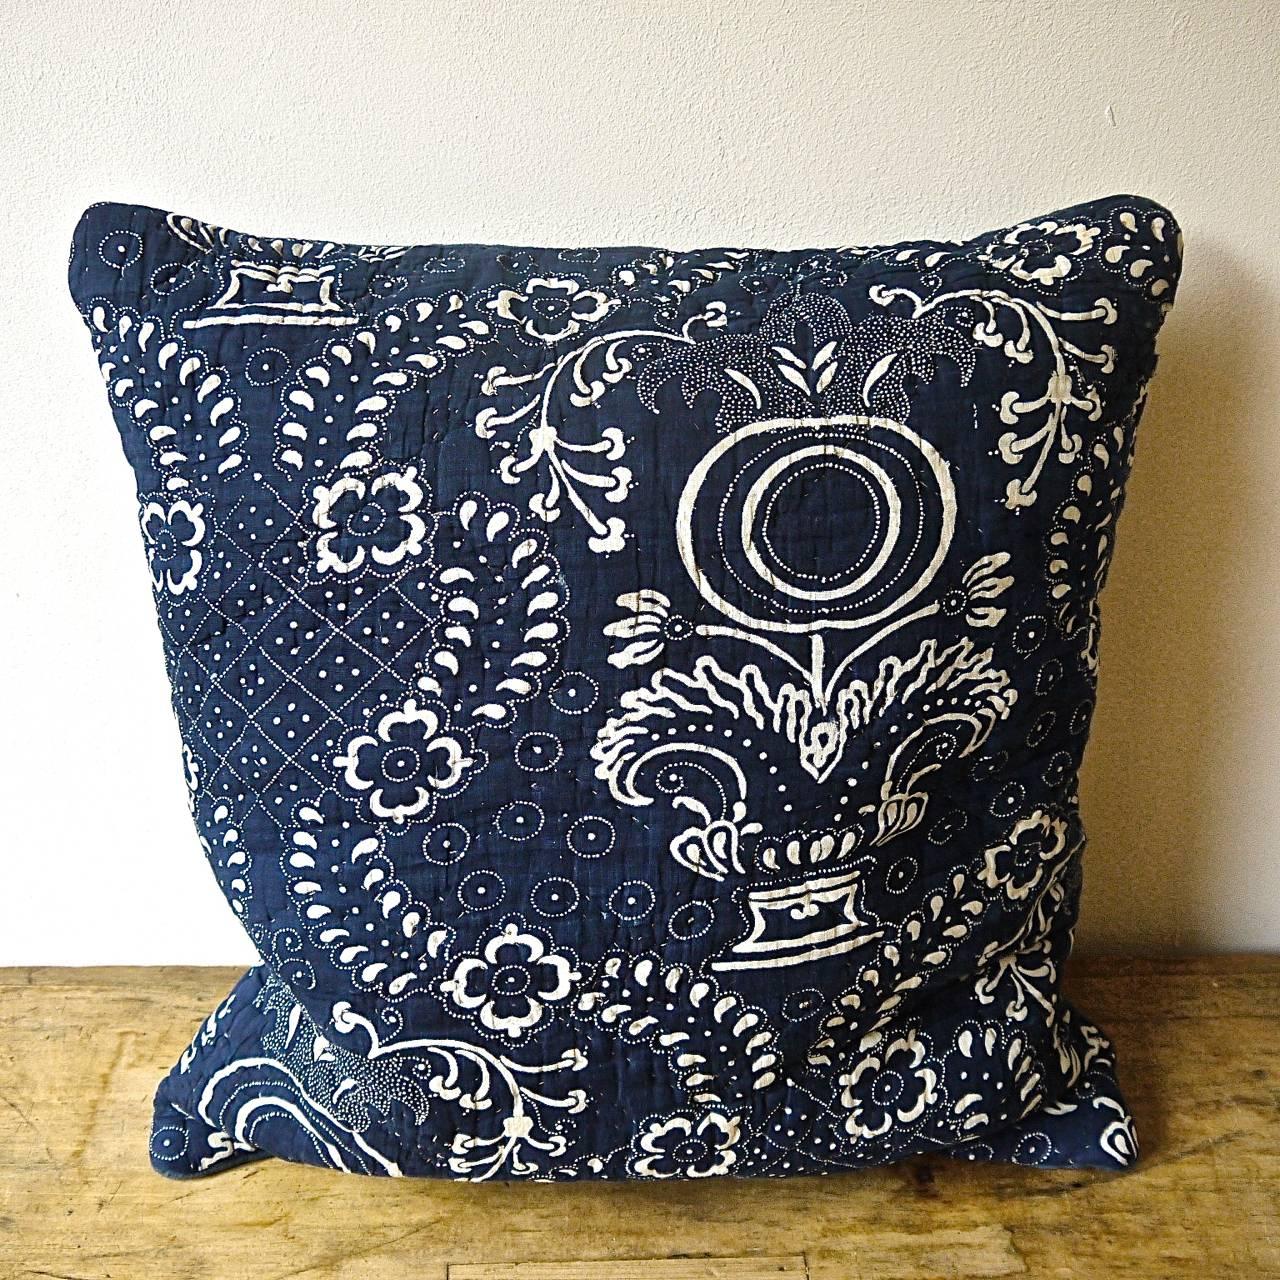 French Toile de Nimes indigo resist block printed cotton cushion. A striking design of stylized pomegranite and floral motifs. Simply quilted and printed on a soft cotton and backed in a dyed 19th century French linen that has a small stitched